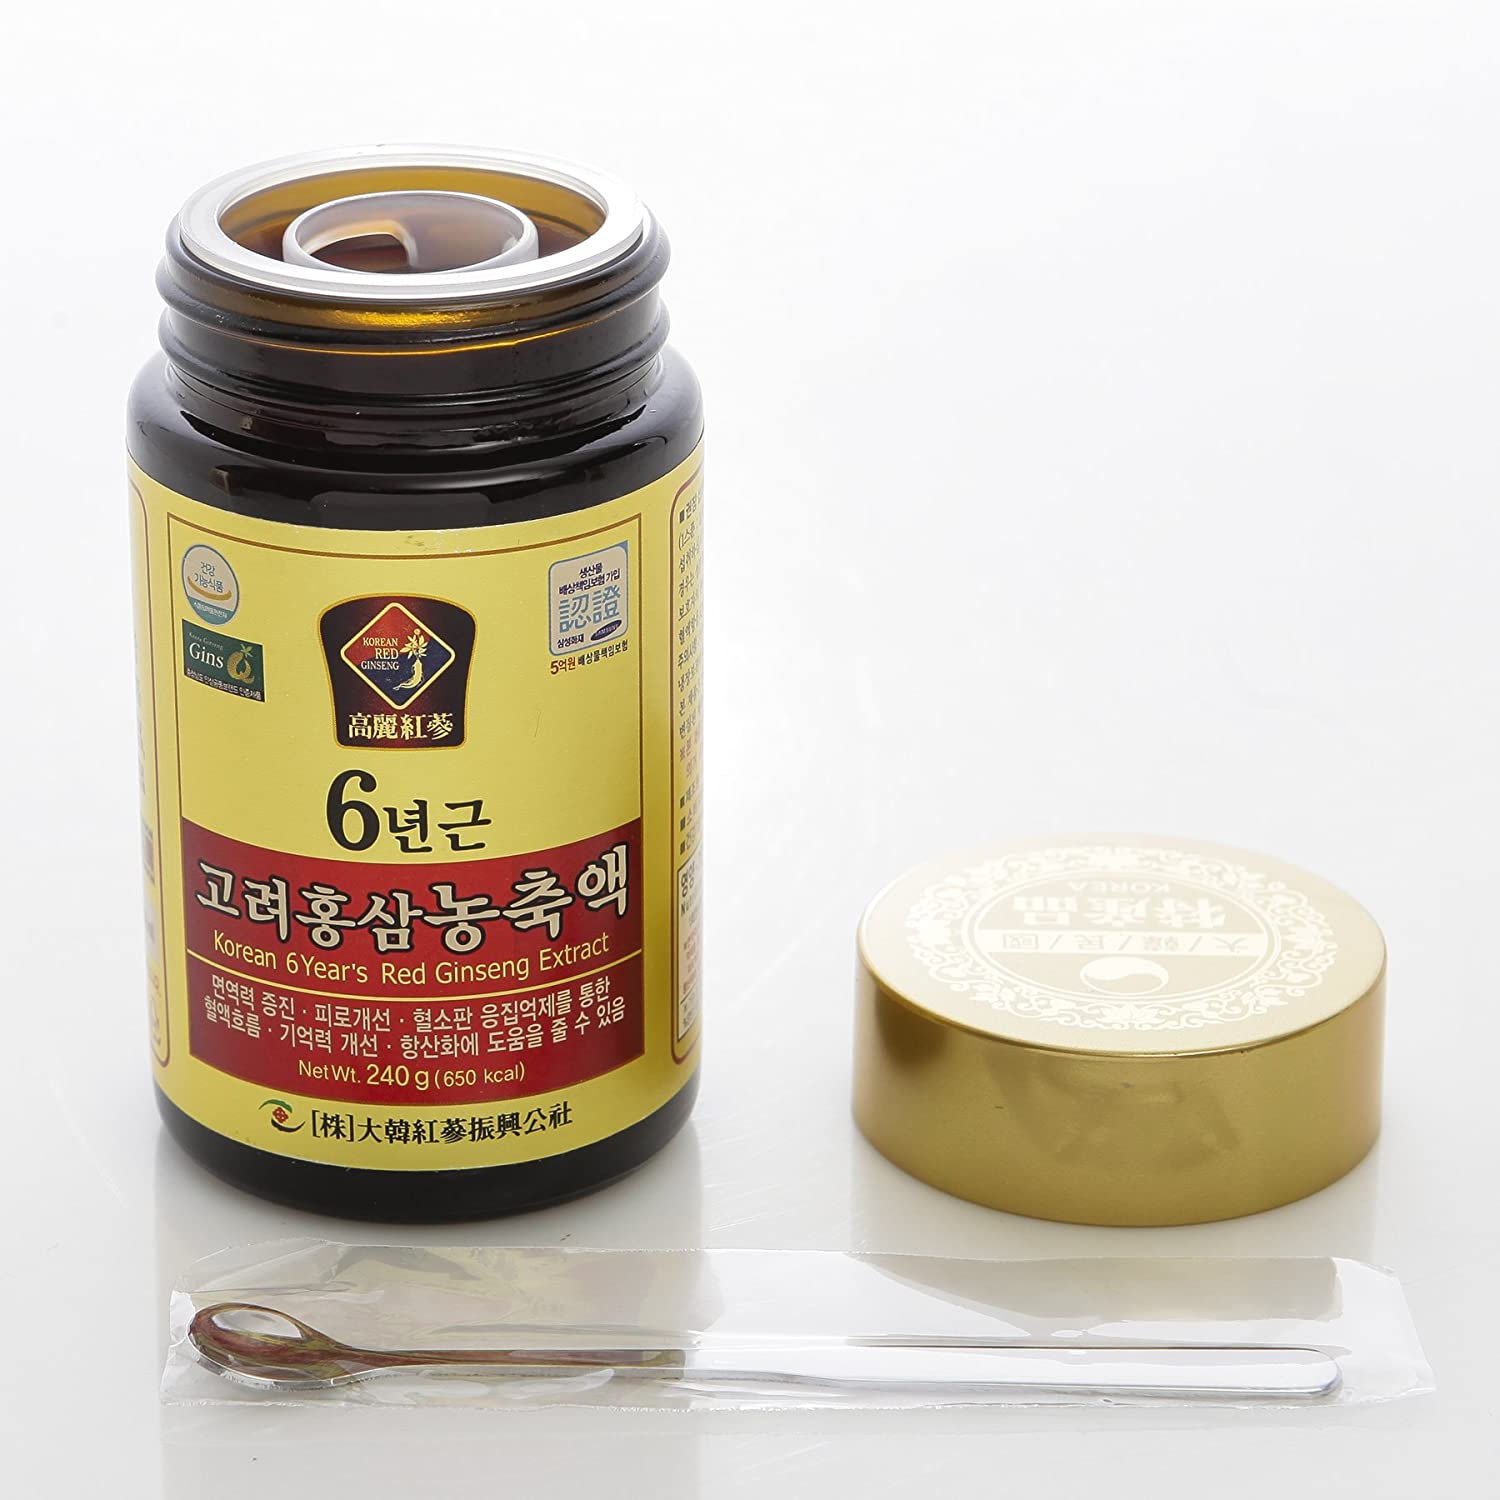 100% Pure Korean Red Ginseng Extracts Gold 6 years Roots 480g Health Supplements Foods Gifts